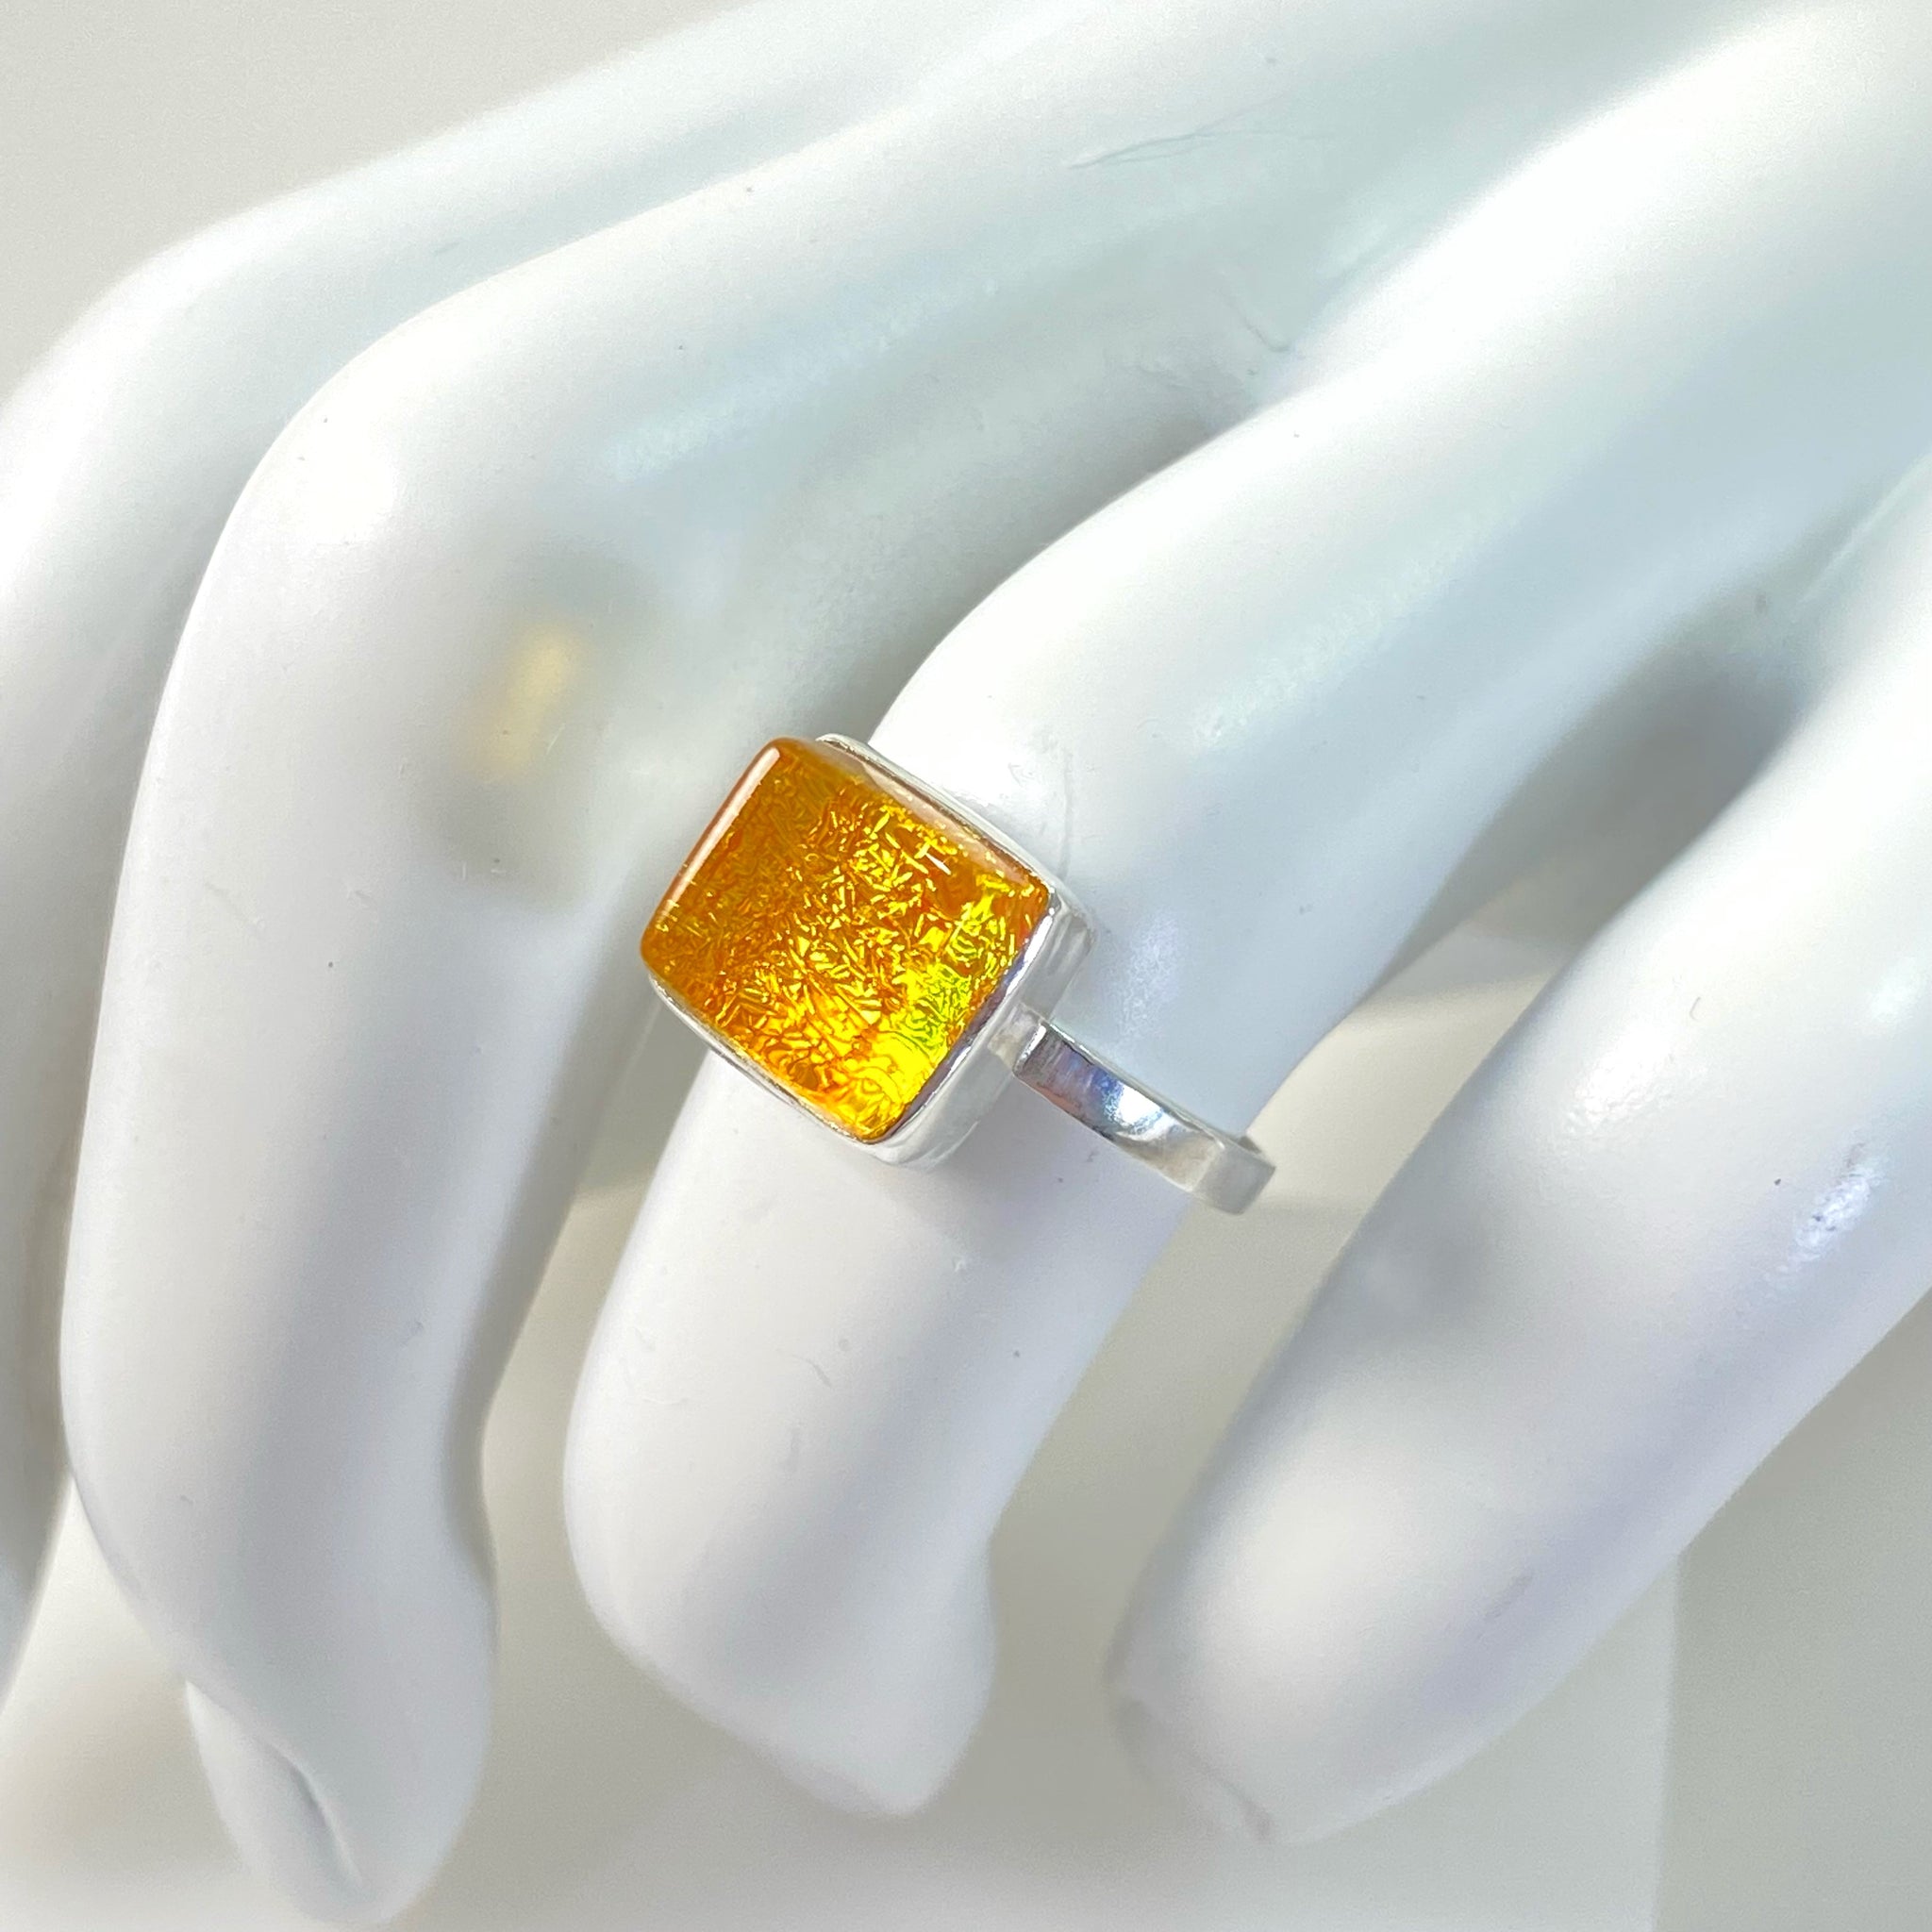 sunshine yellow glass square ring, fused glass, glass jewelry, glass and silver jewelry, handmade, handcrafted, American Craft, hand fabricated jewelry, hand fabricated jewellery, Athen, Georgia, colorful jewelry, sparkle, bullseye glass, dichroic glass, art jewelry